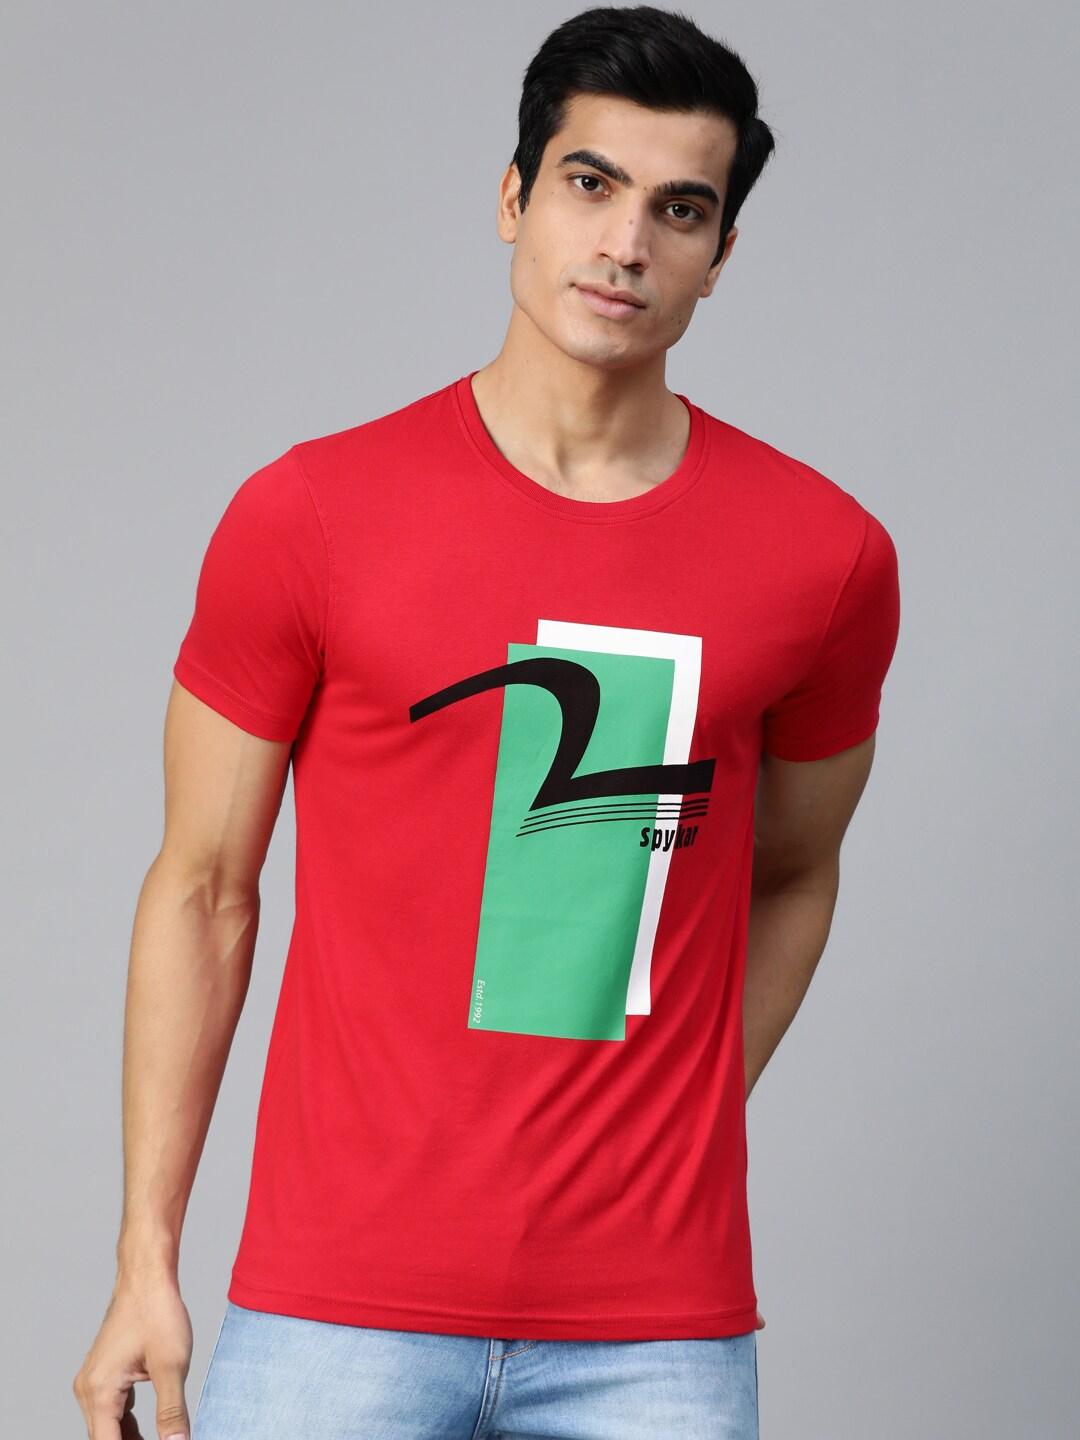 UnderJeans by Spykar Men Red & Green Printed Round Neck T-shirt